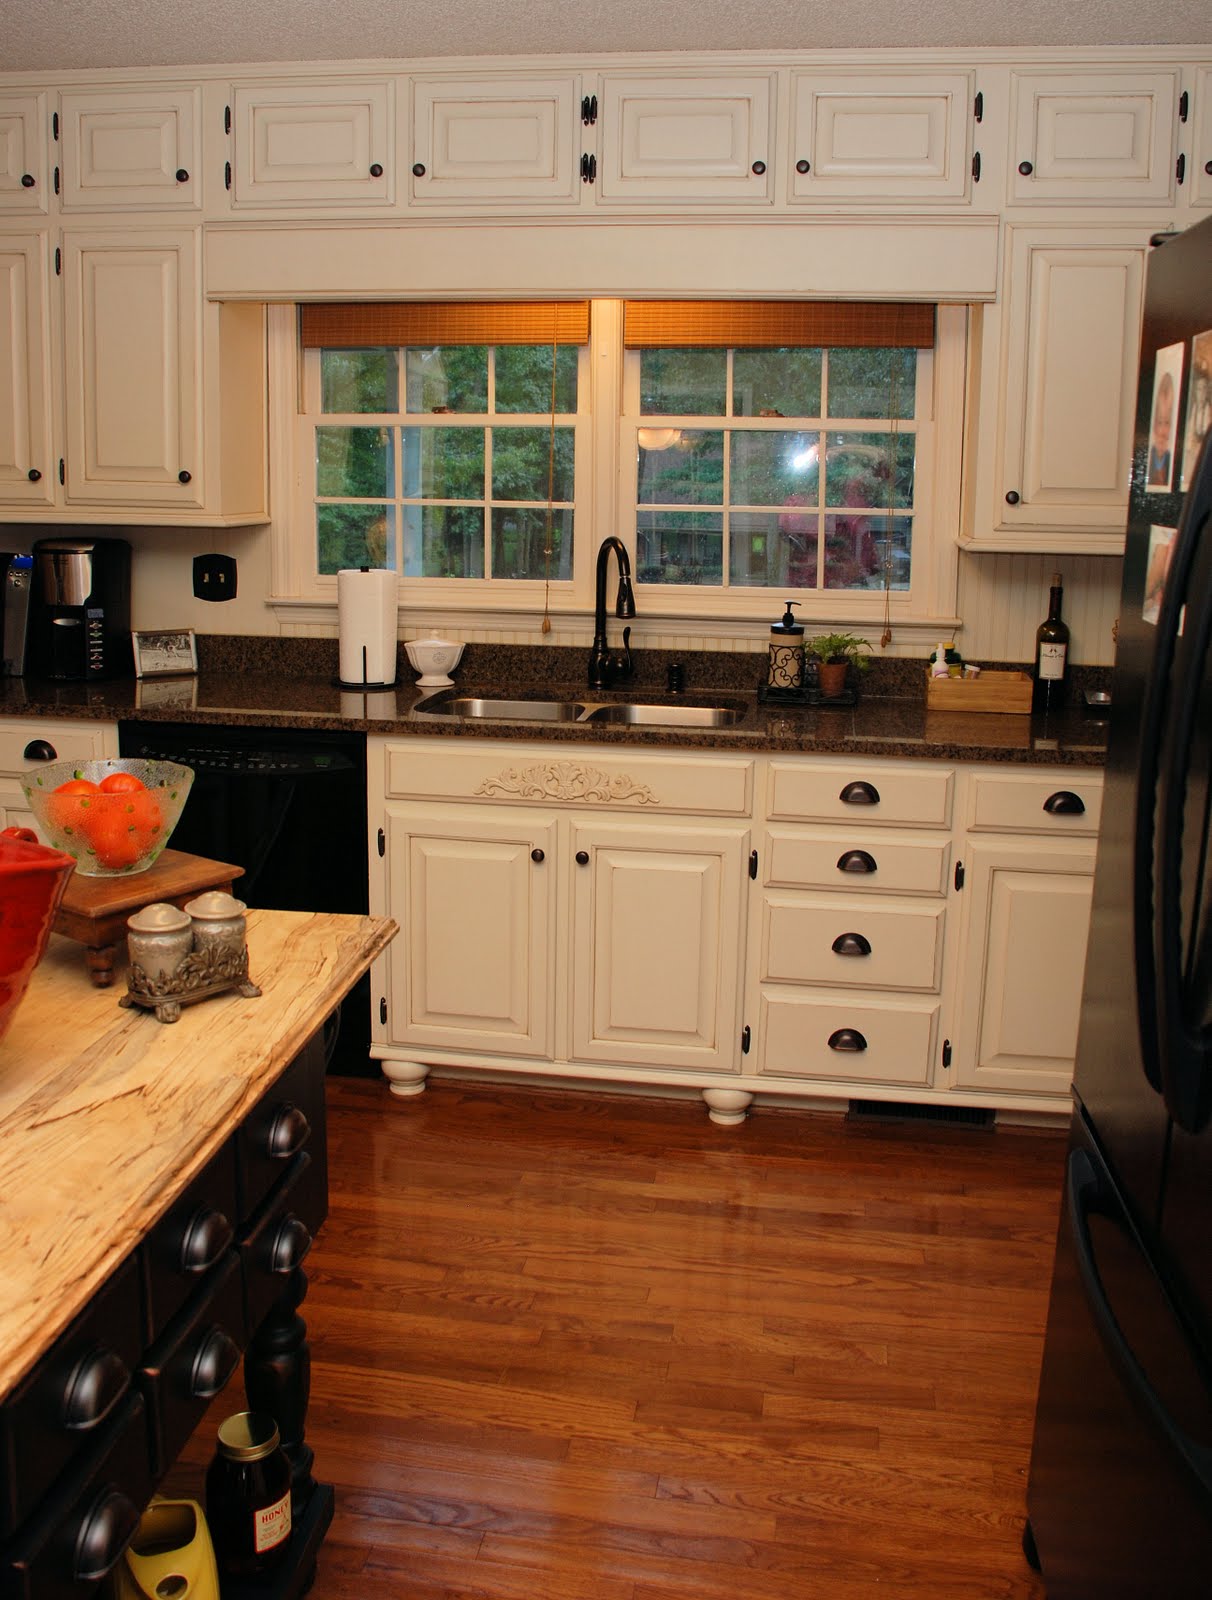 Remodelaholic | From Oak Kitchen Cabinets to Painted White ...